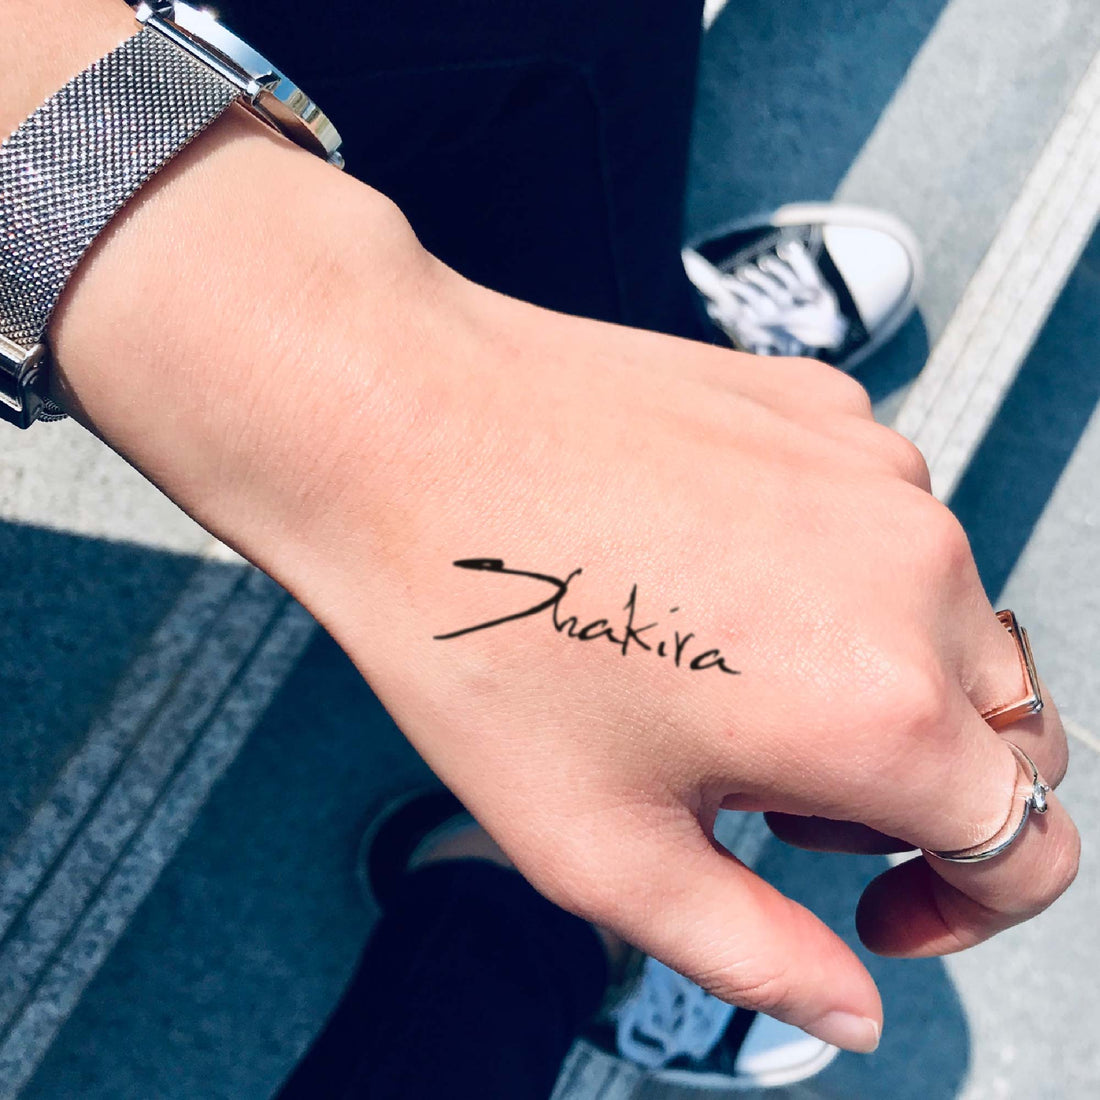 Shakira custom temporary tattoo sticker design idea inspiration meanings removal arm wrist hand words font name signature calligraphy lyrics tour concert outfits merch accessory gift souvenir costumes wear dress up code